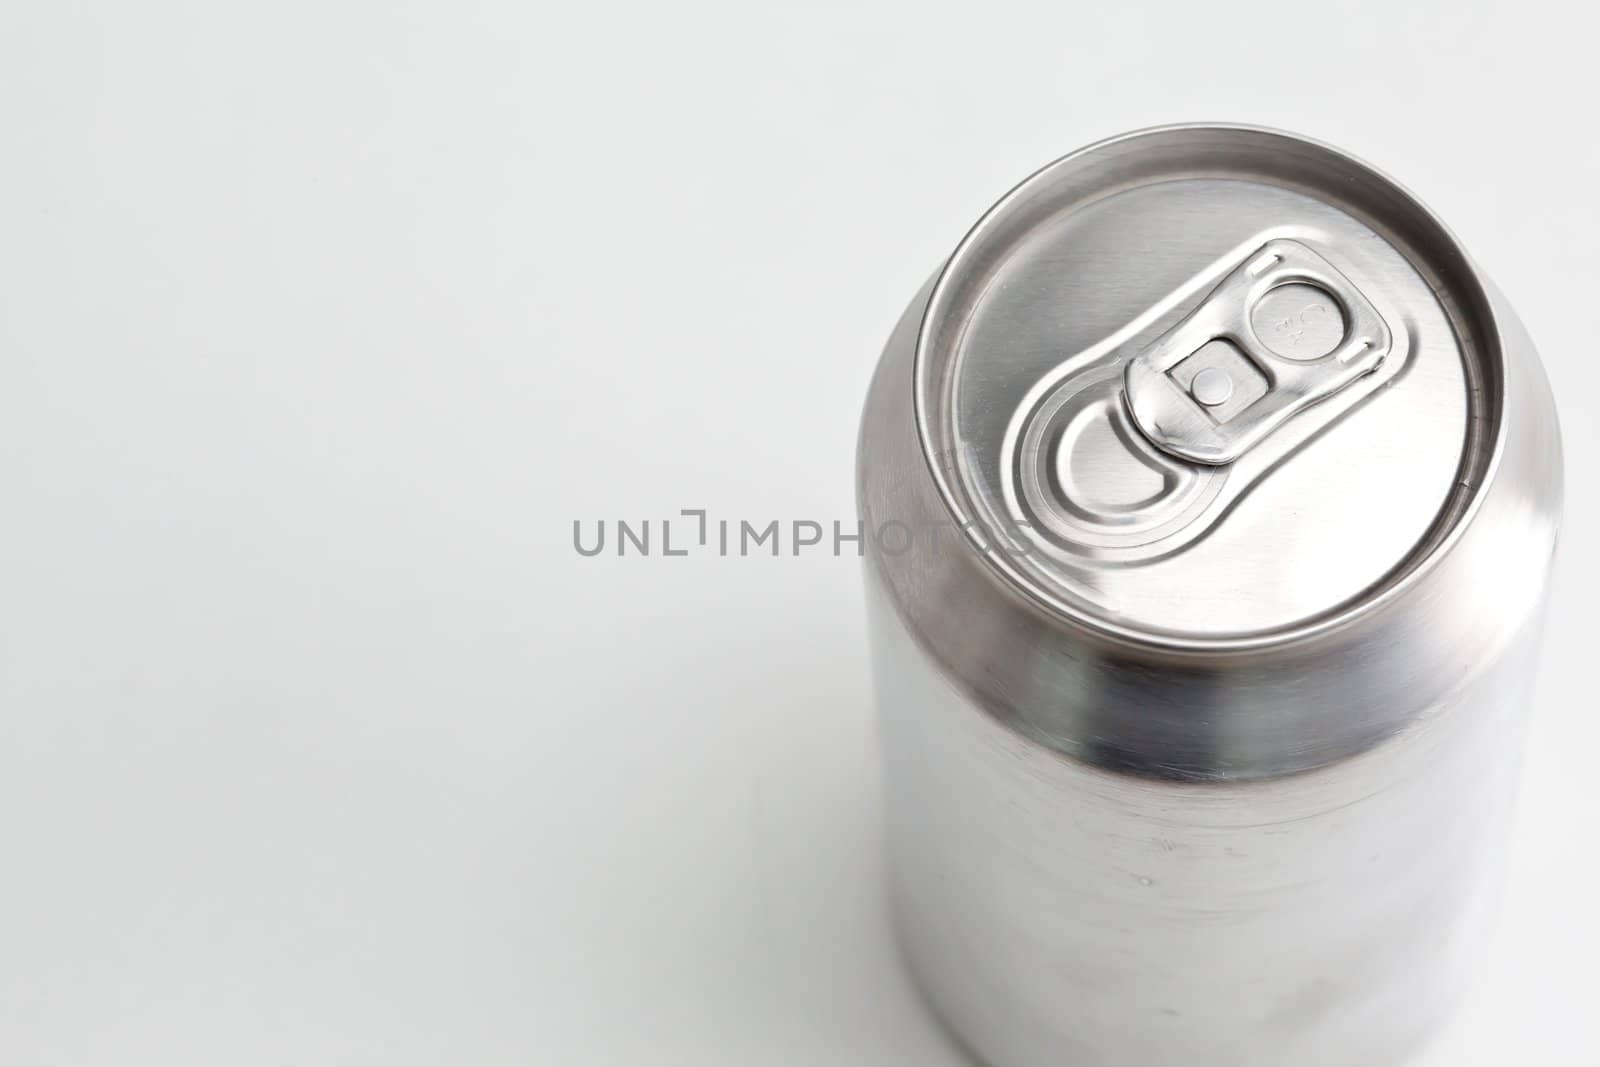 Overhead view of a closed aluminium can against a white background